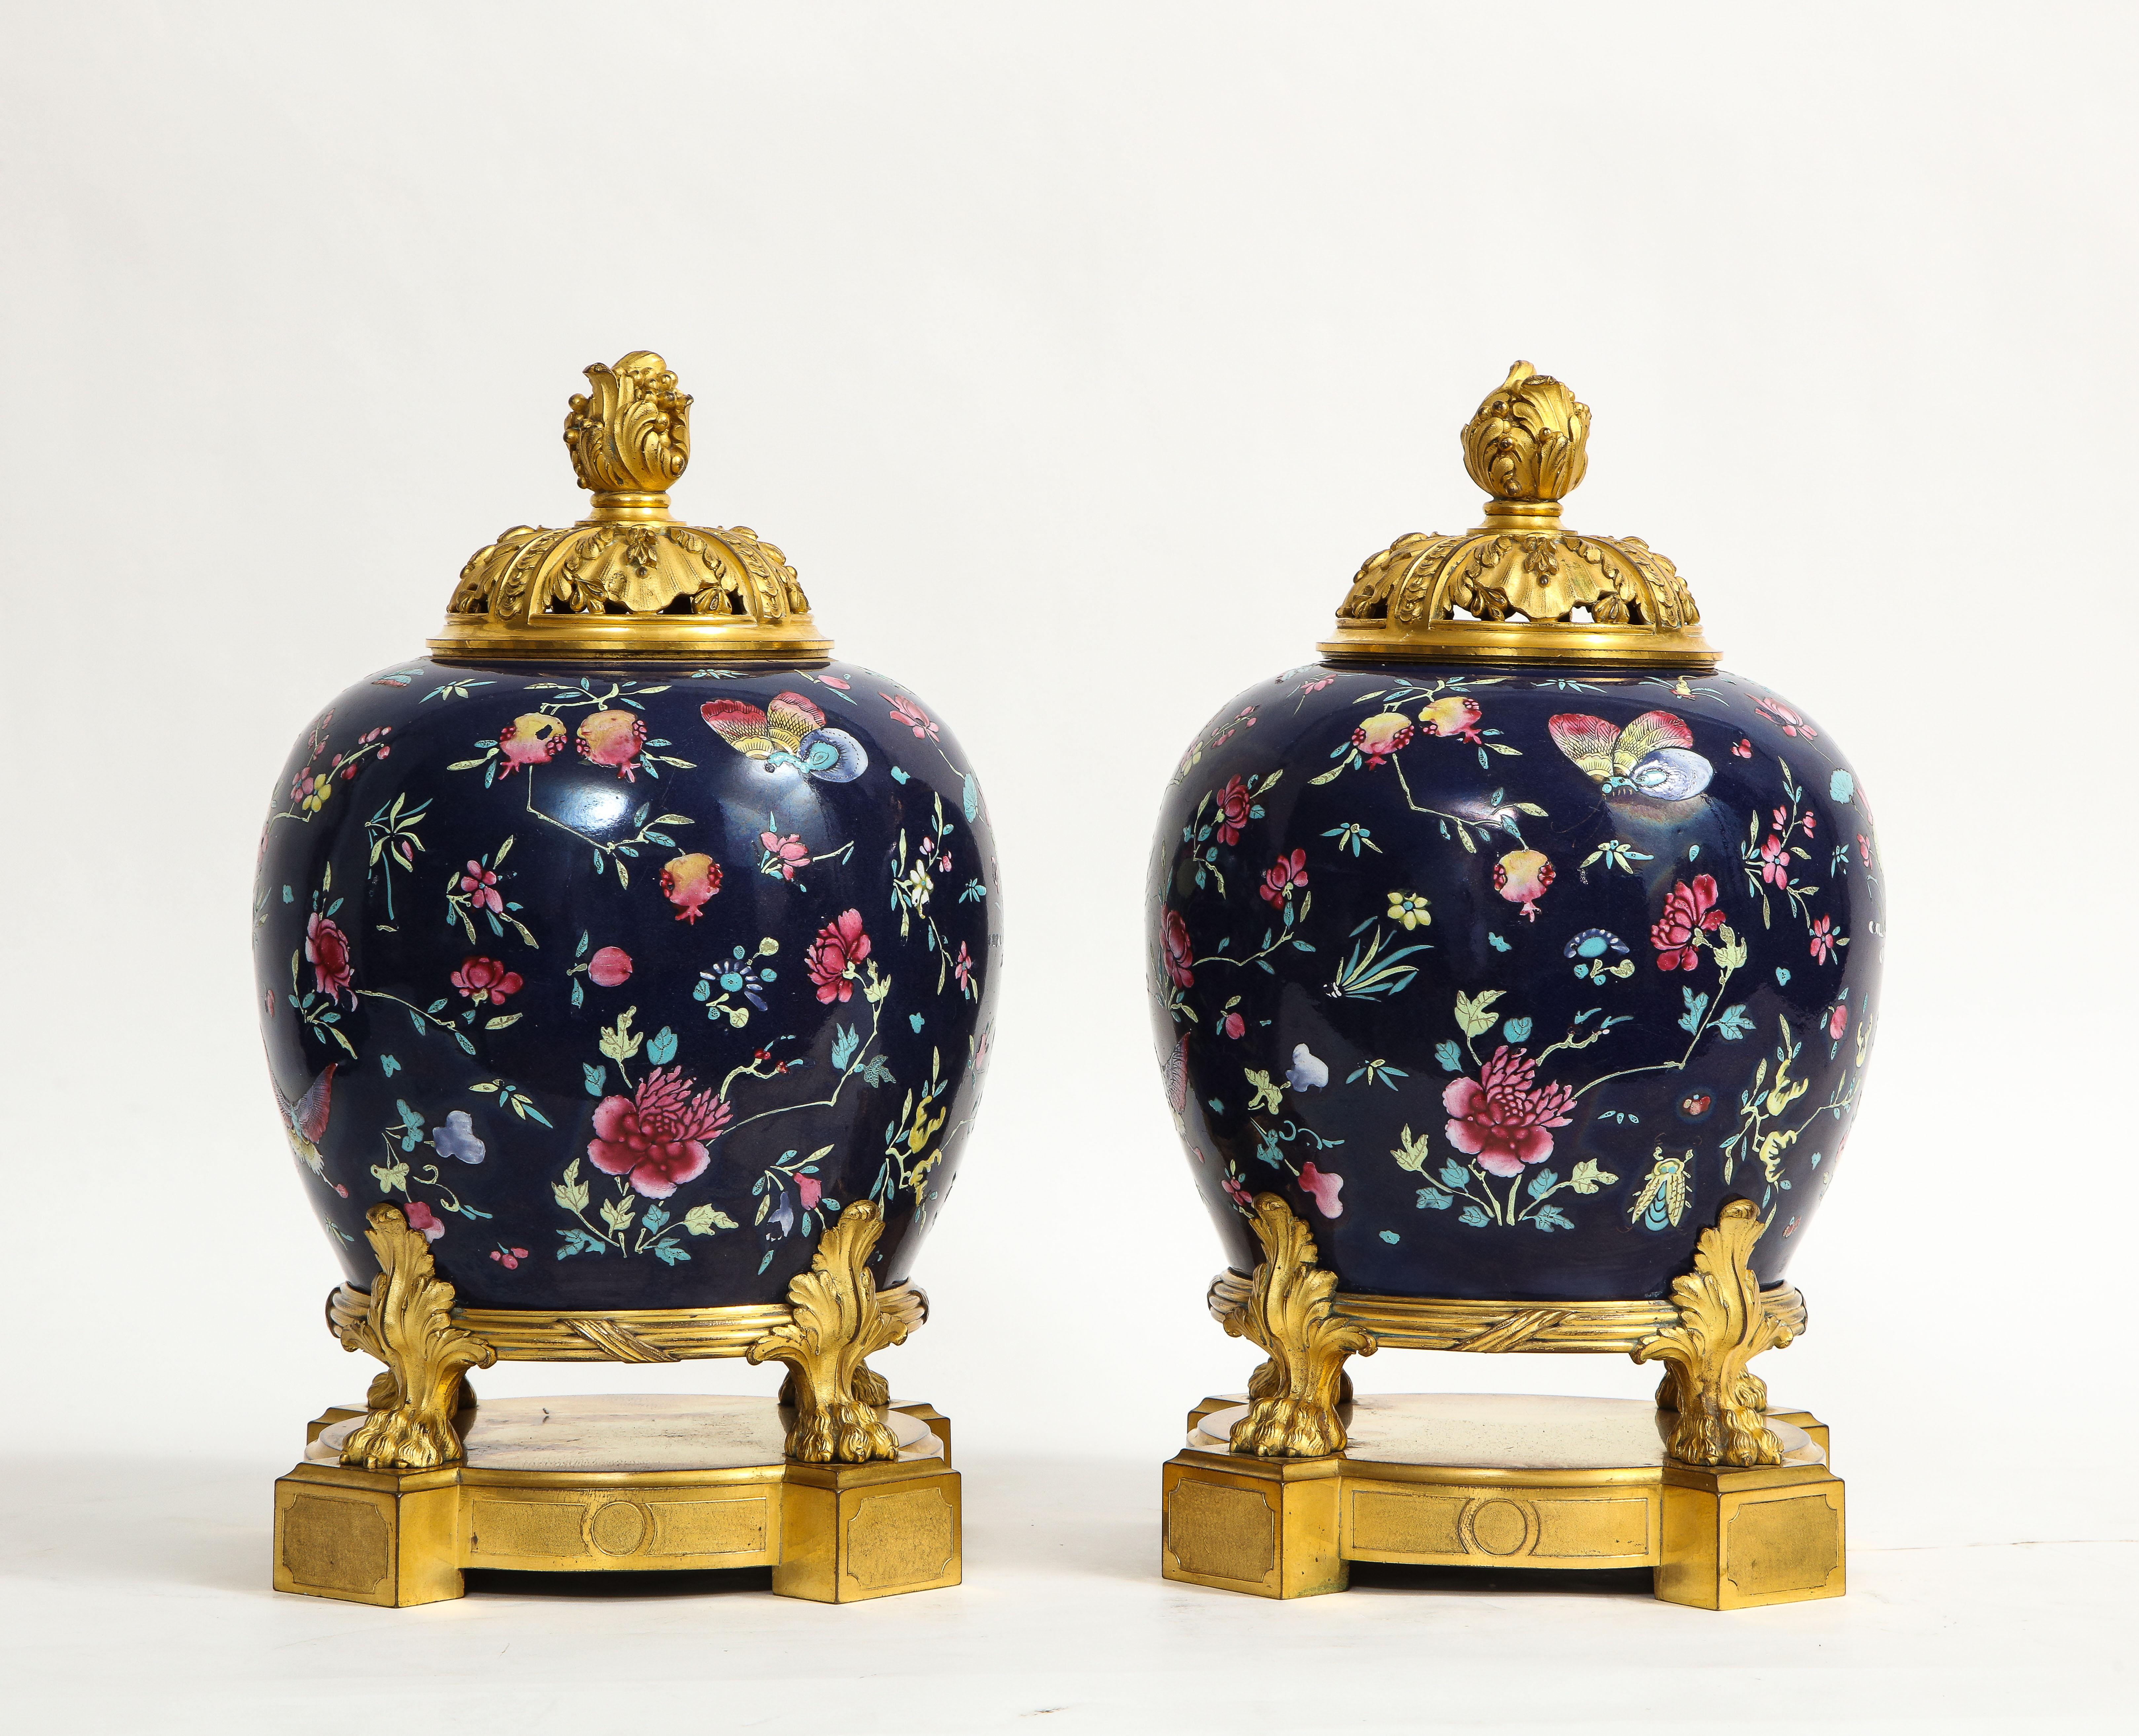 A Fantastic Pair of 19th Century French Louis XVI Style Dore Bronze Mounted Chinese Famille Rose Porcelain Potpourris. Each dark blue ground porcelain body is beautifully hand-enameled with gorgeous famille rose designs and an array of enamels which